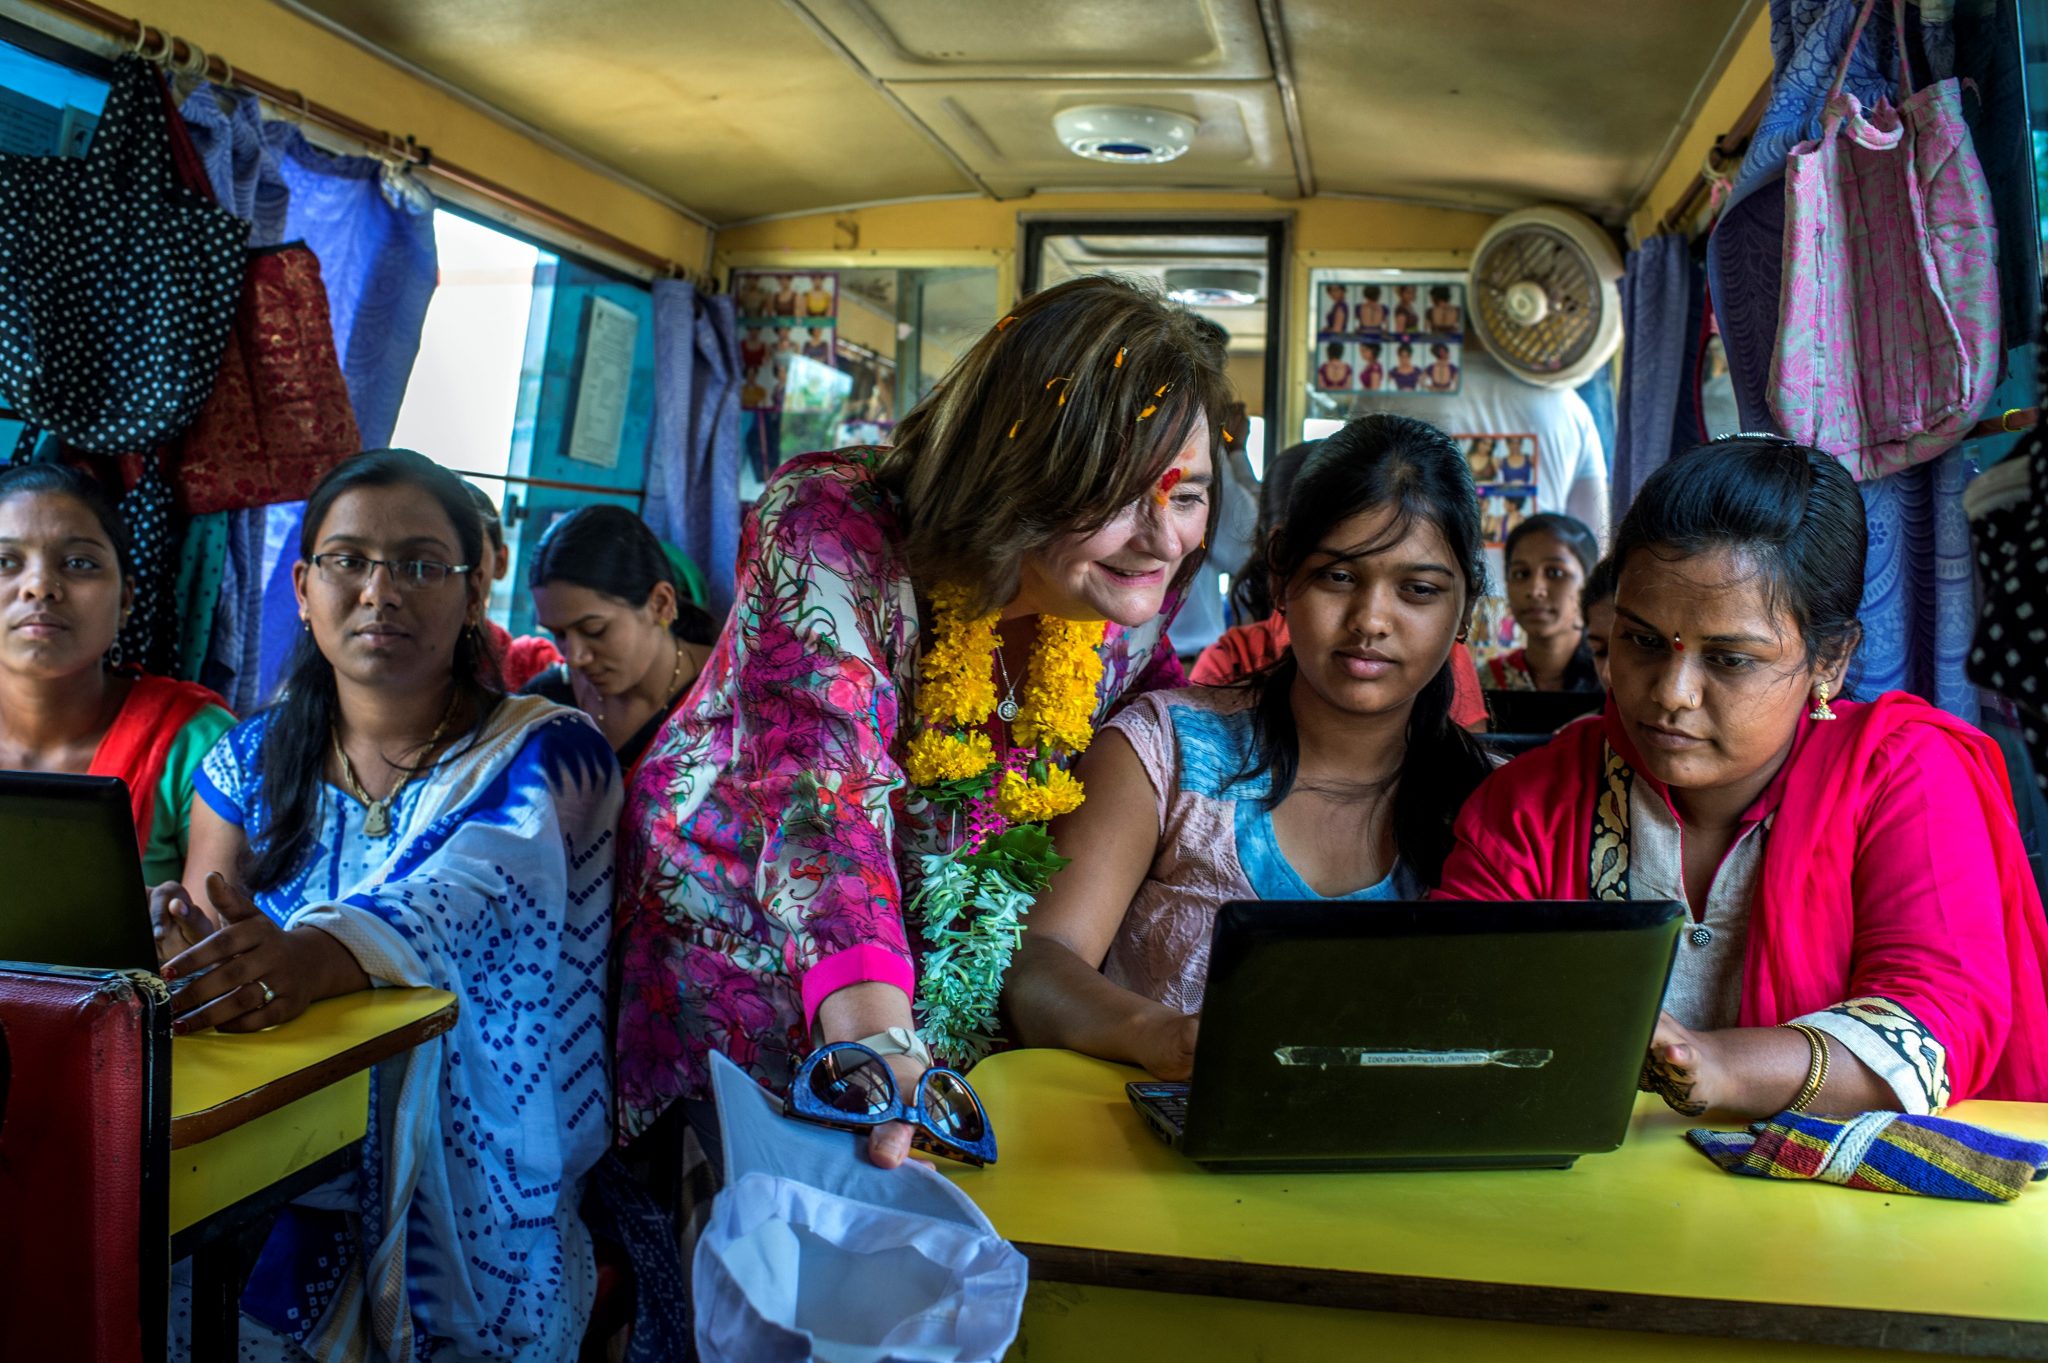 Cherie Blair looks over the shoulder of a girl to see something on her computer